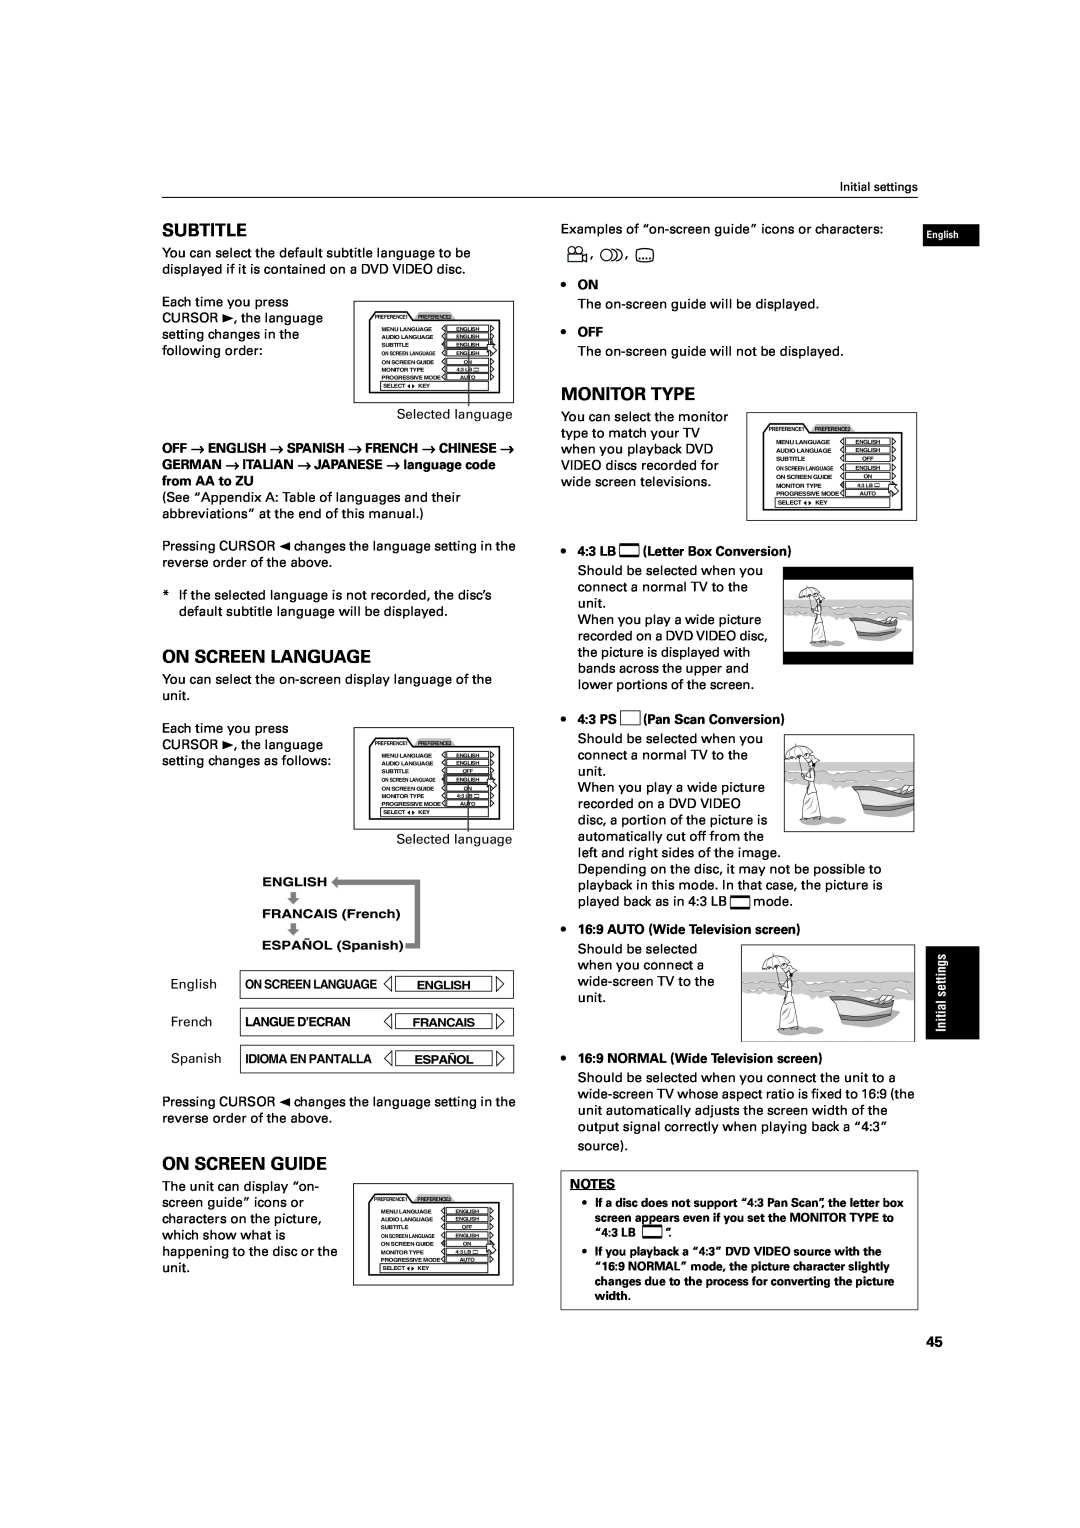 JVC XV-S60 manual Subtitle, Monitor Type, On Screen Language, On Screen Guide, Selected language, French, Initial settings 